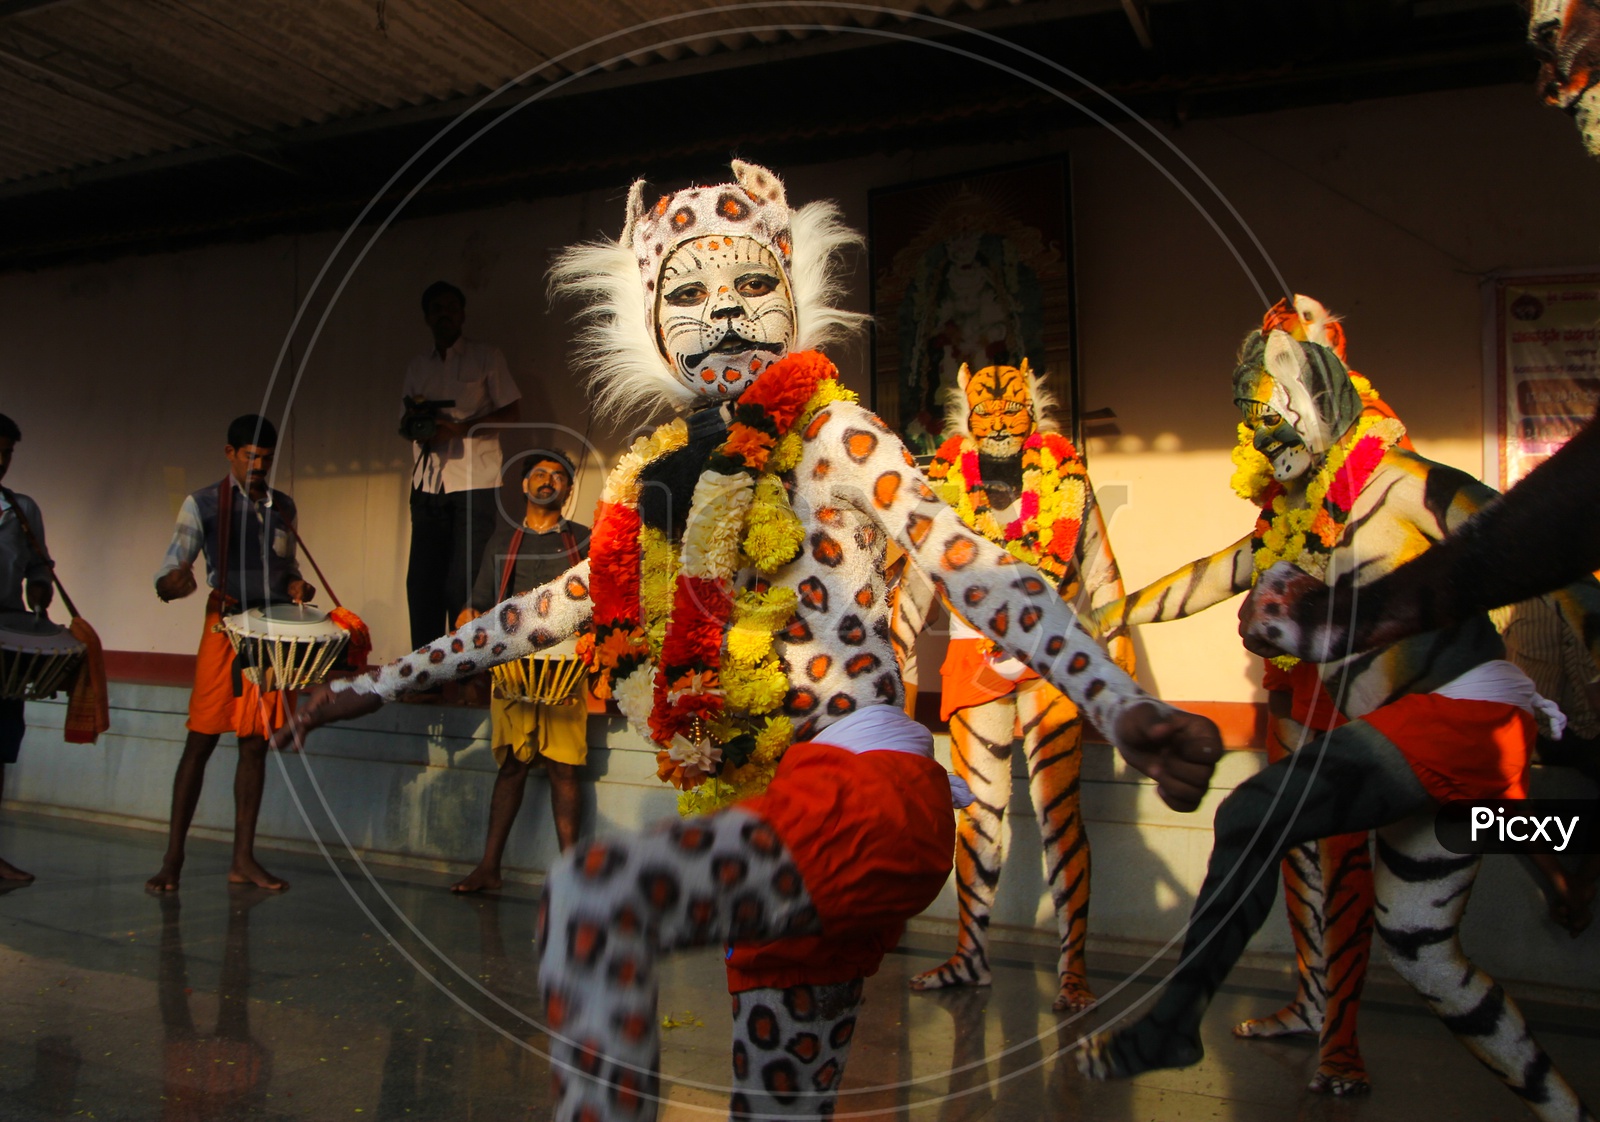 The Tiger Dance